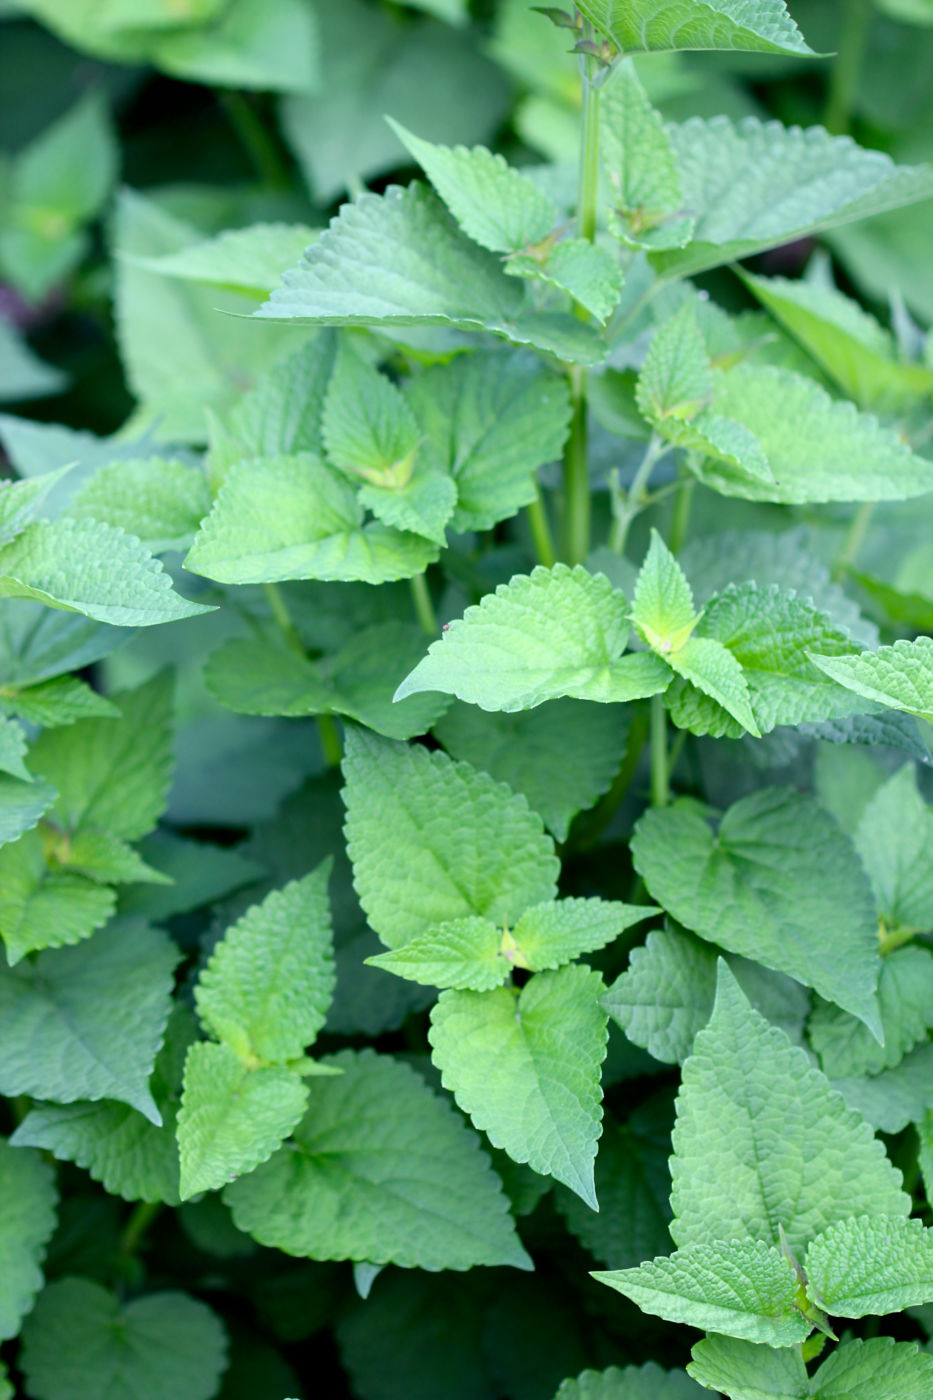 Tender anise hyssop leaves in the prime stage for culinary uses